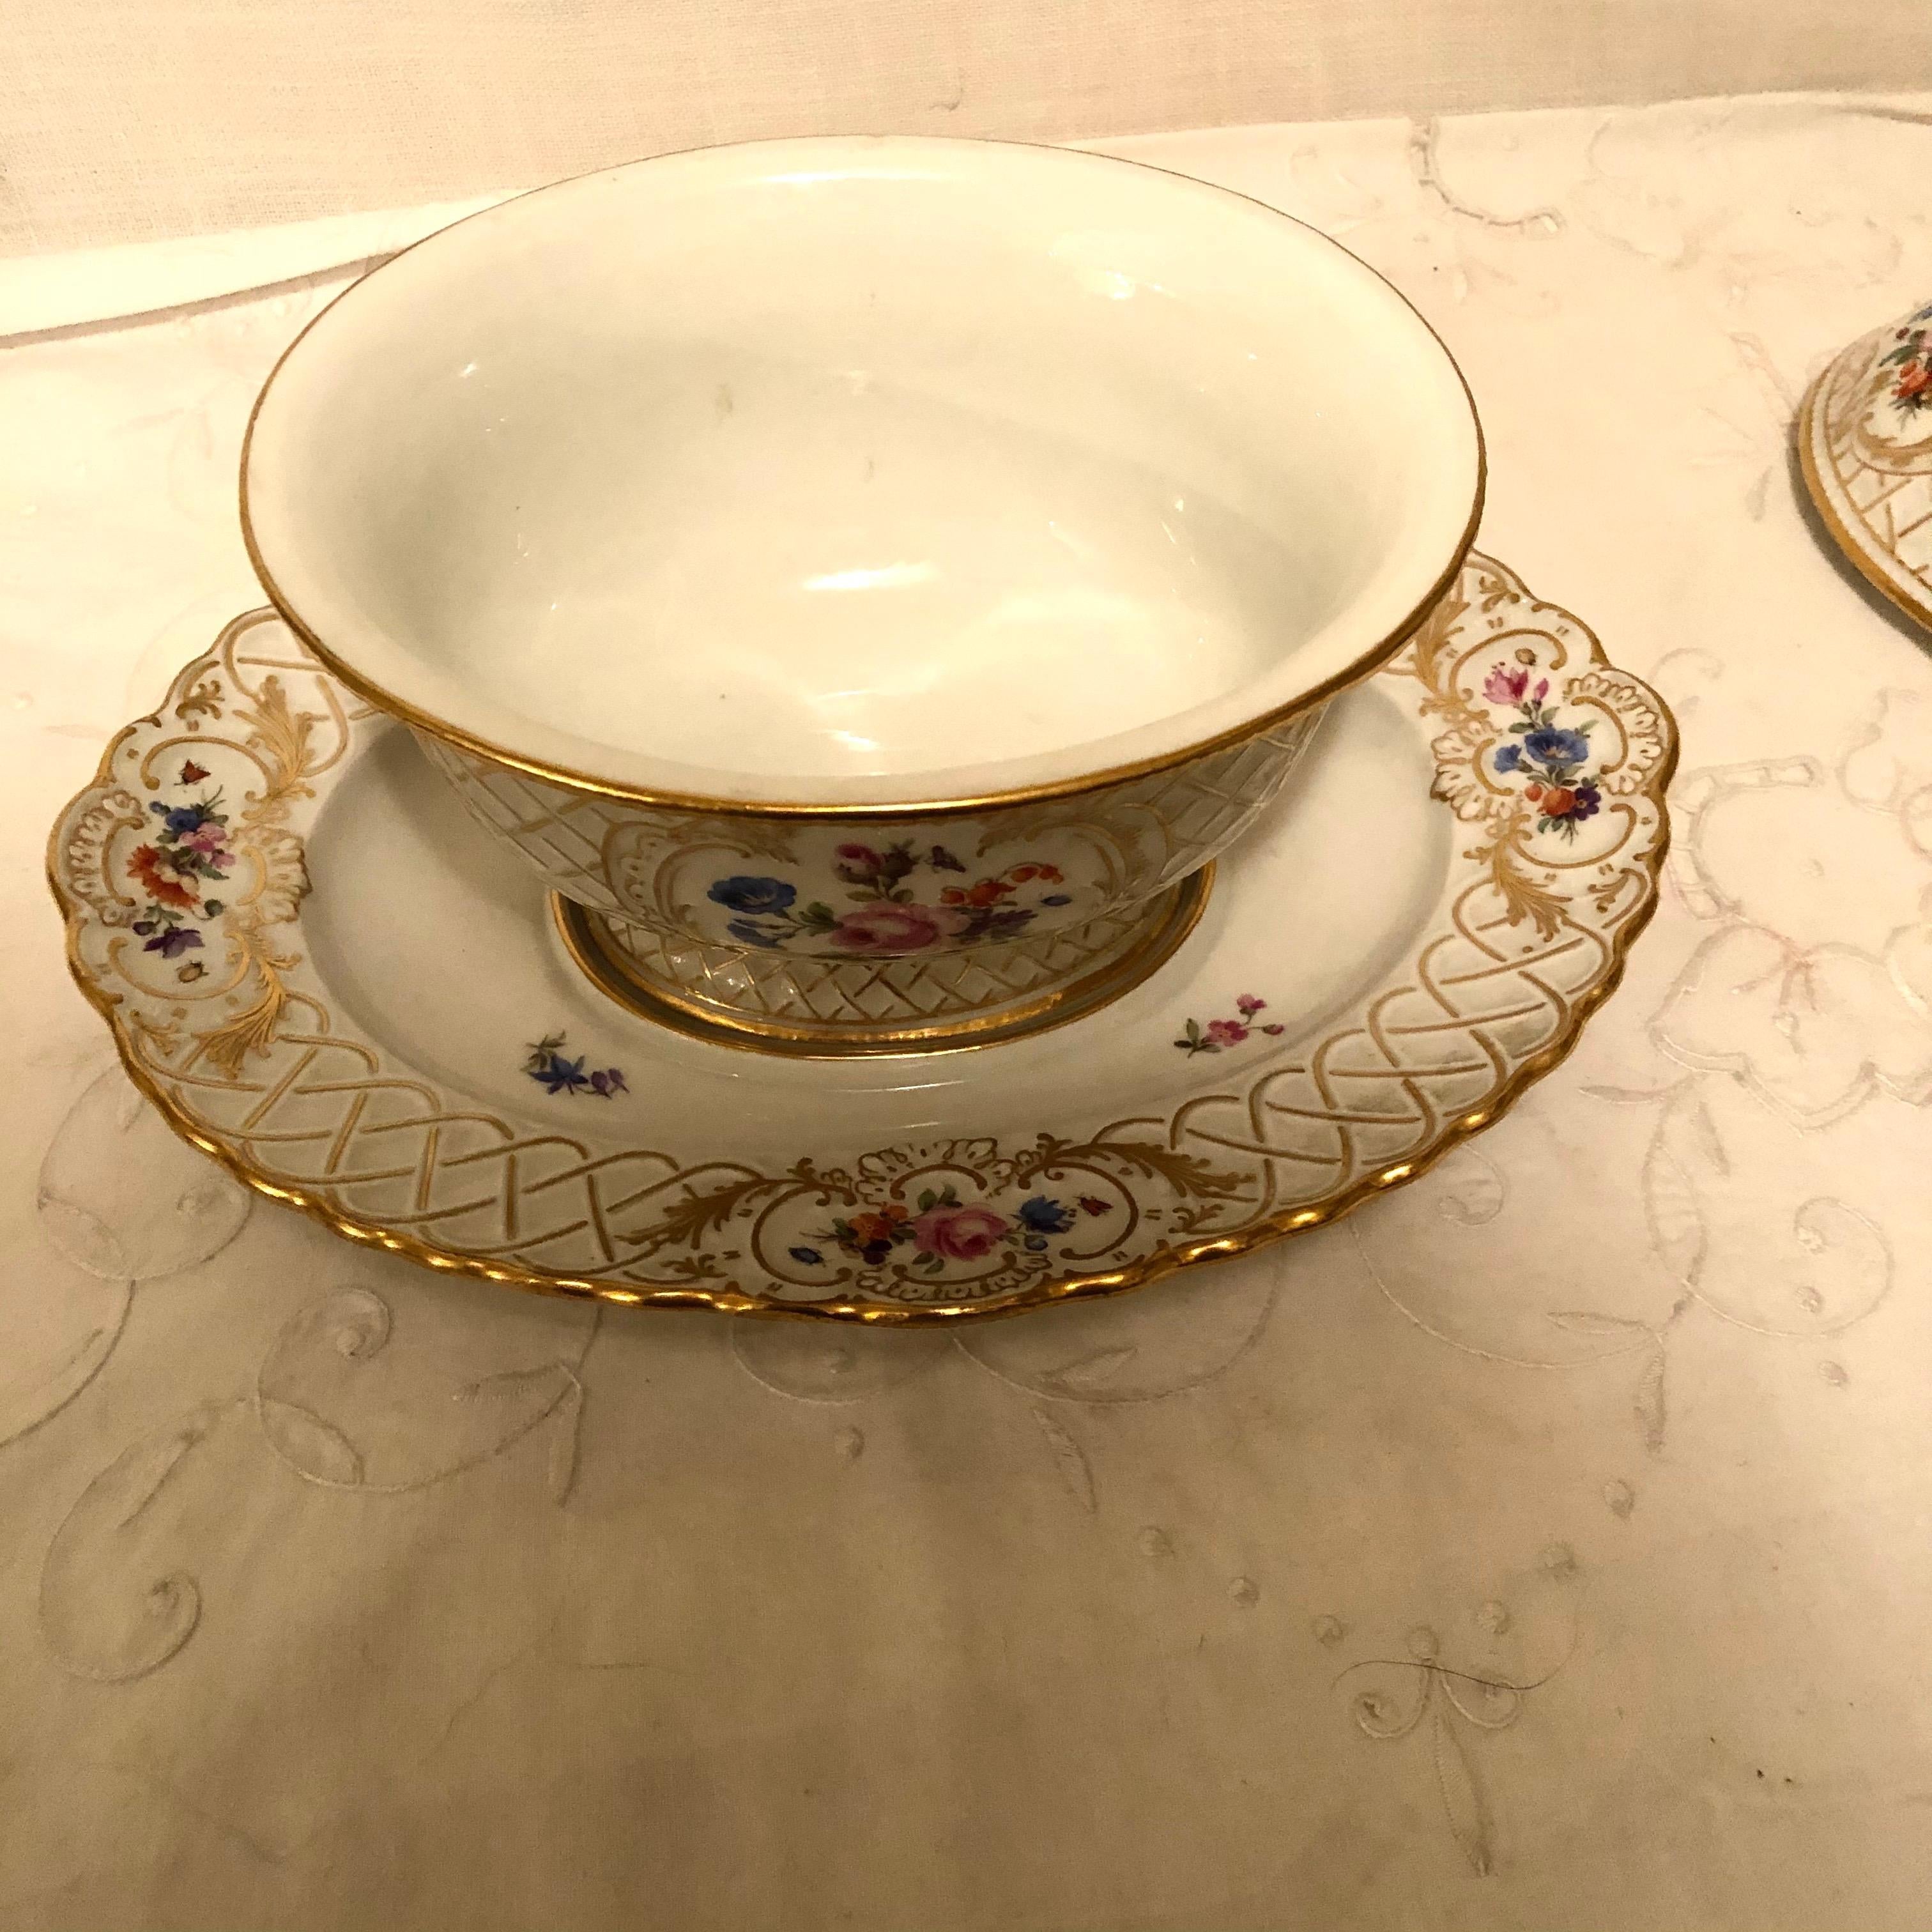 Porcelain Rare Meissen Gravy or Saucier with Attached Underplate and Cover with Strawberry For Sale